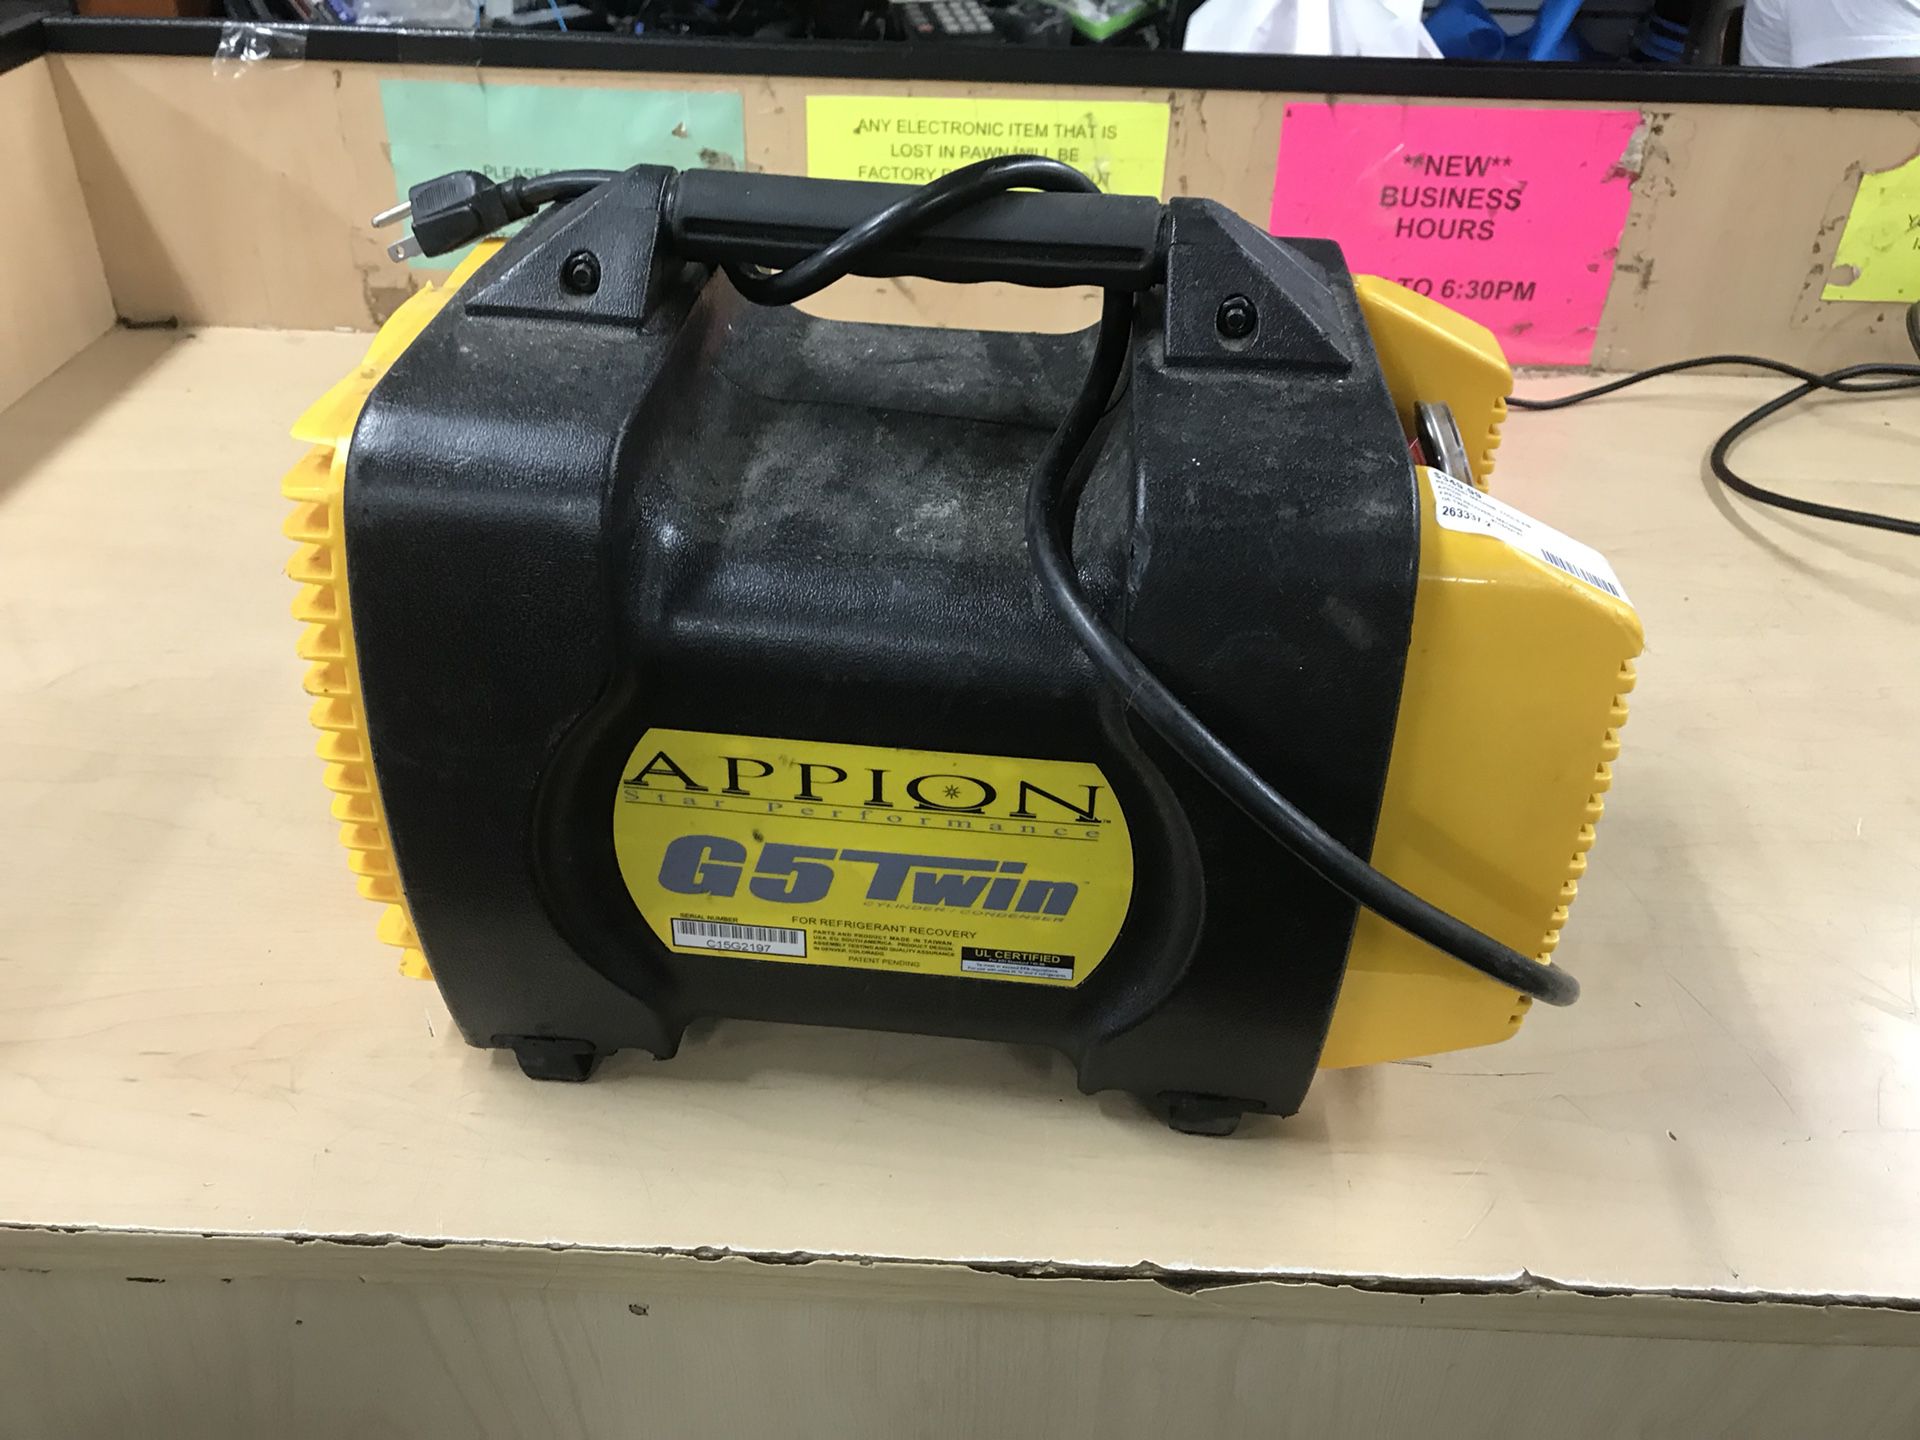 Appion Freon Recovery machine